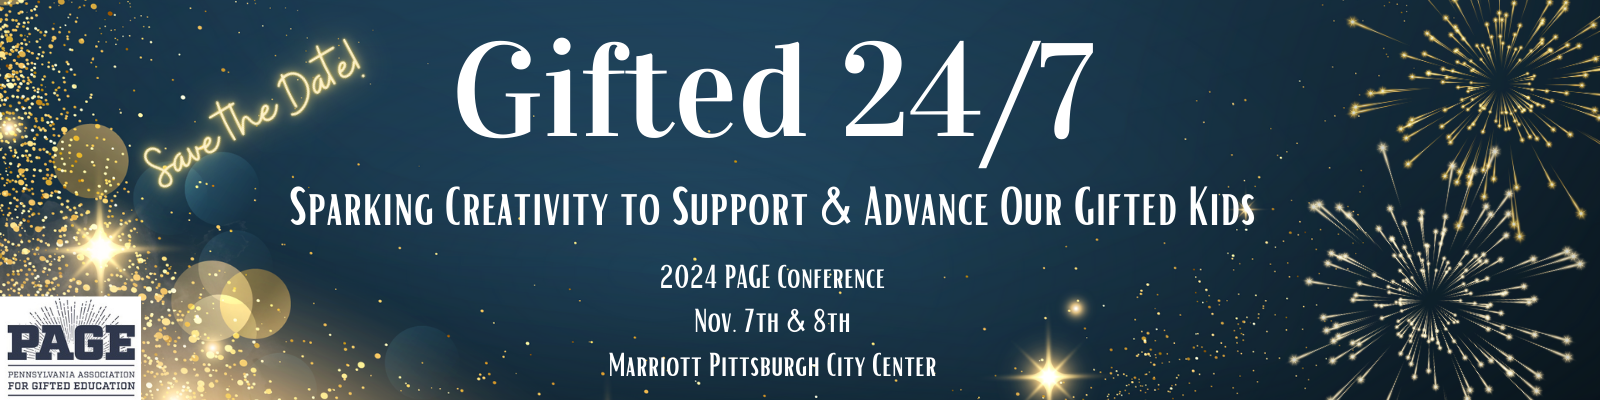 2024 Annual Conference